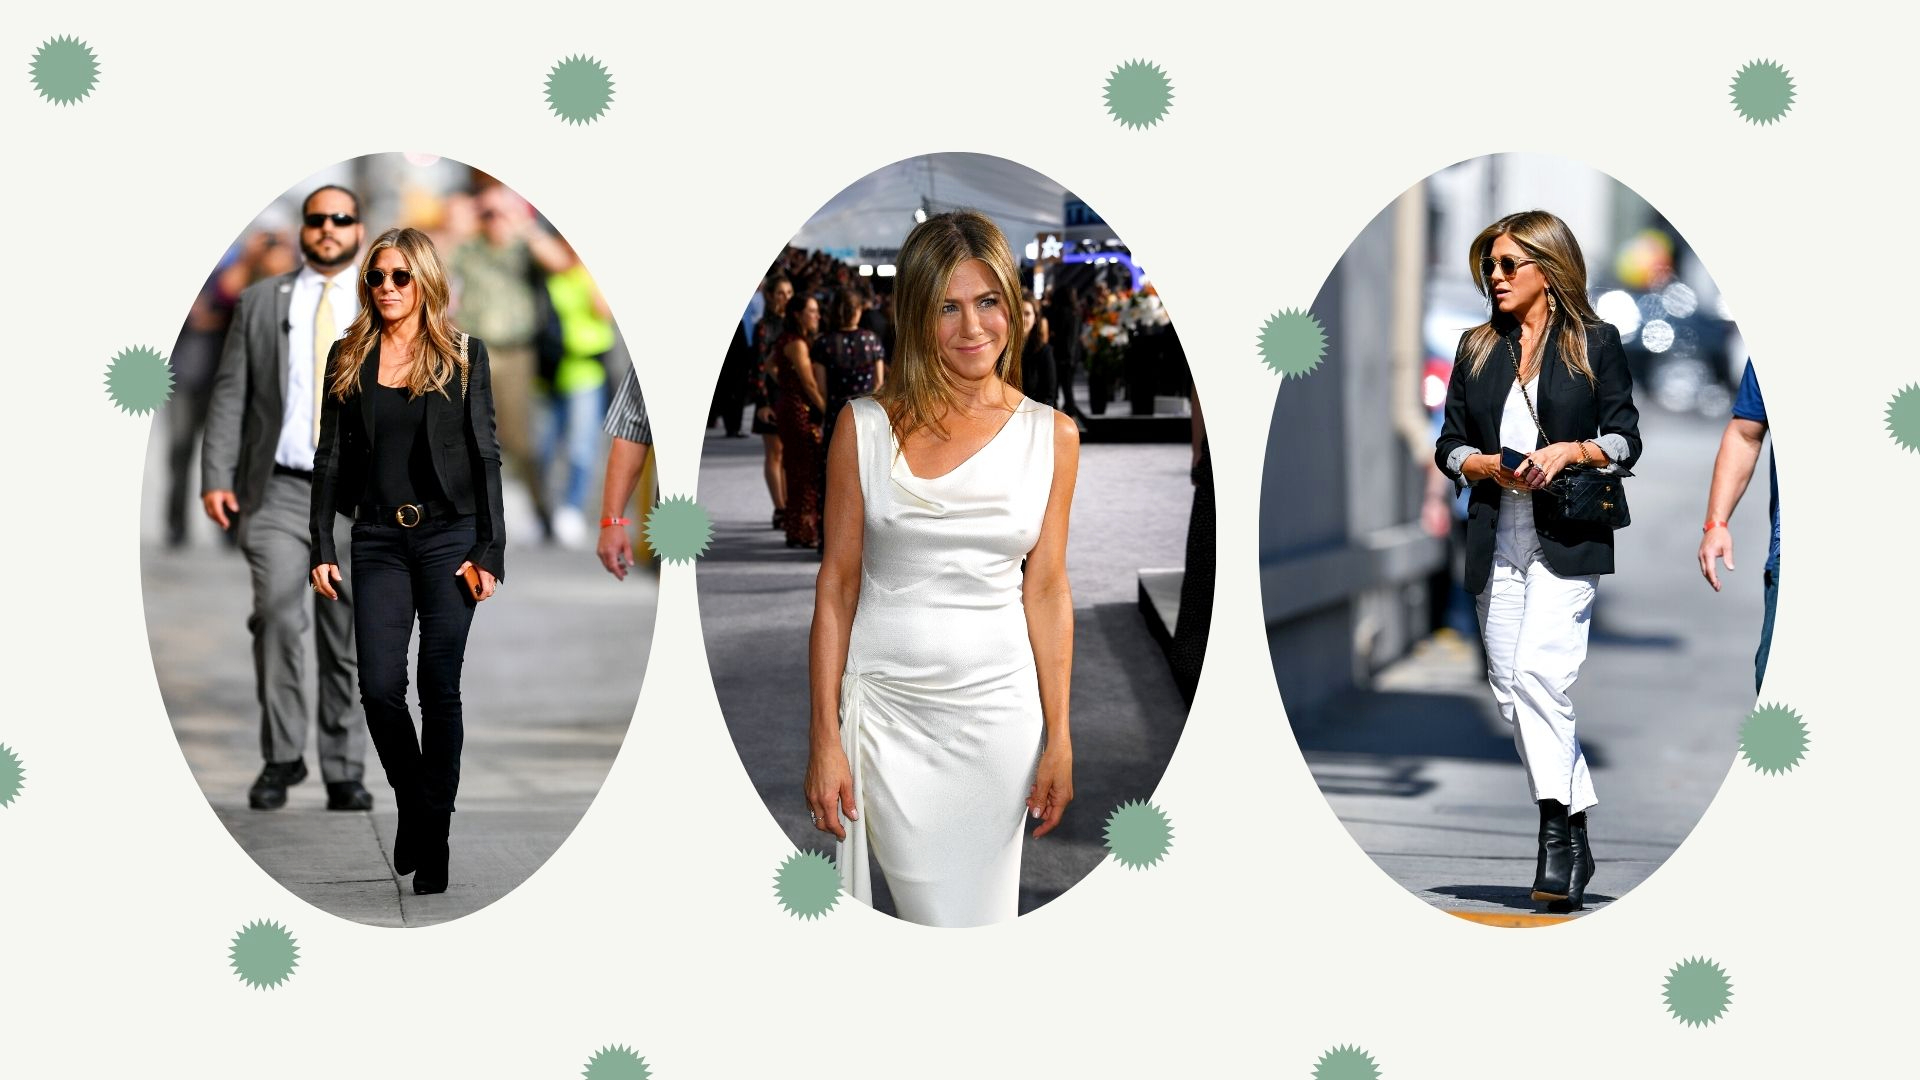 Jennifer Aniston Style Ideas - 14 Outfits and Style Tricks to Try